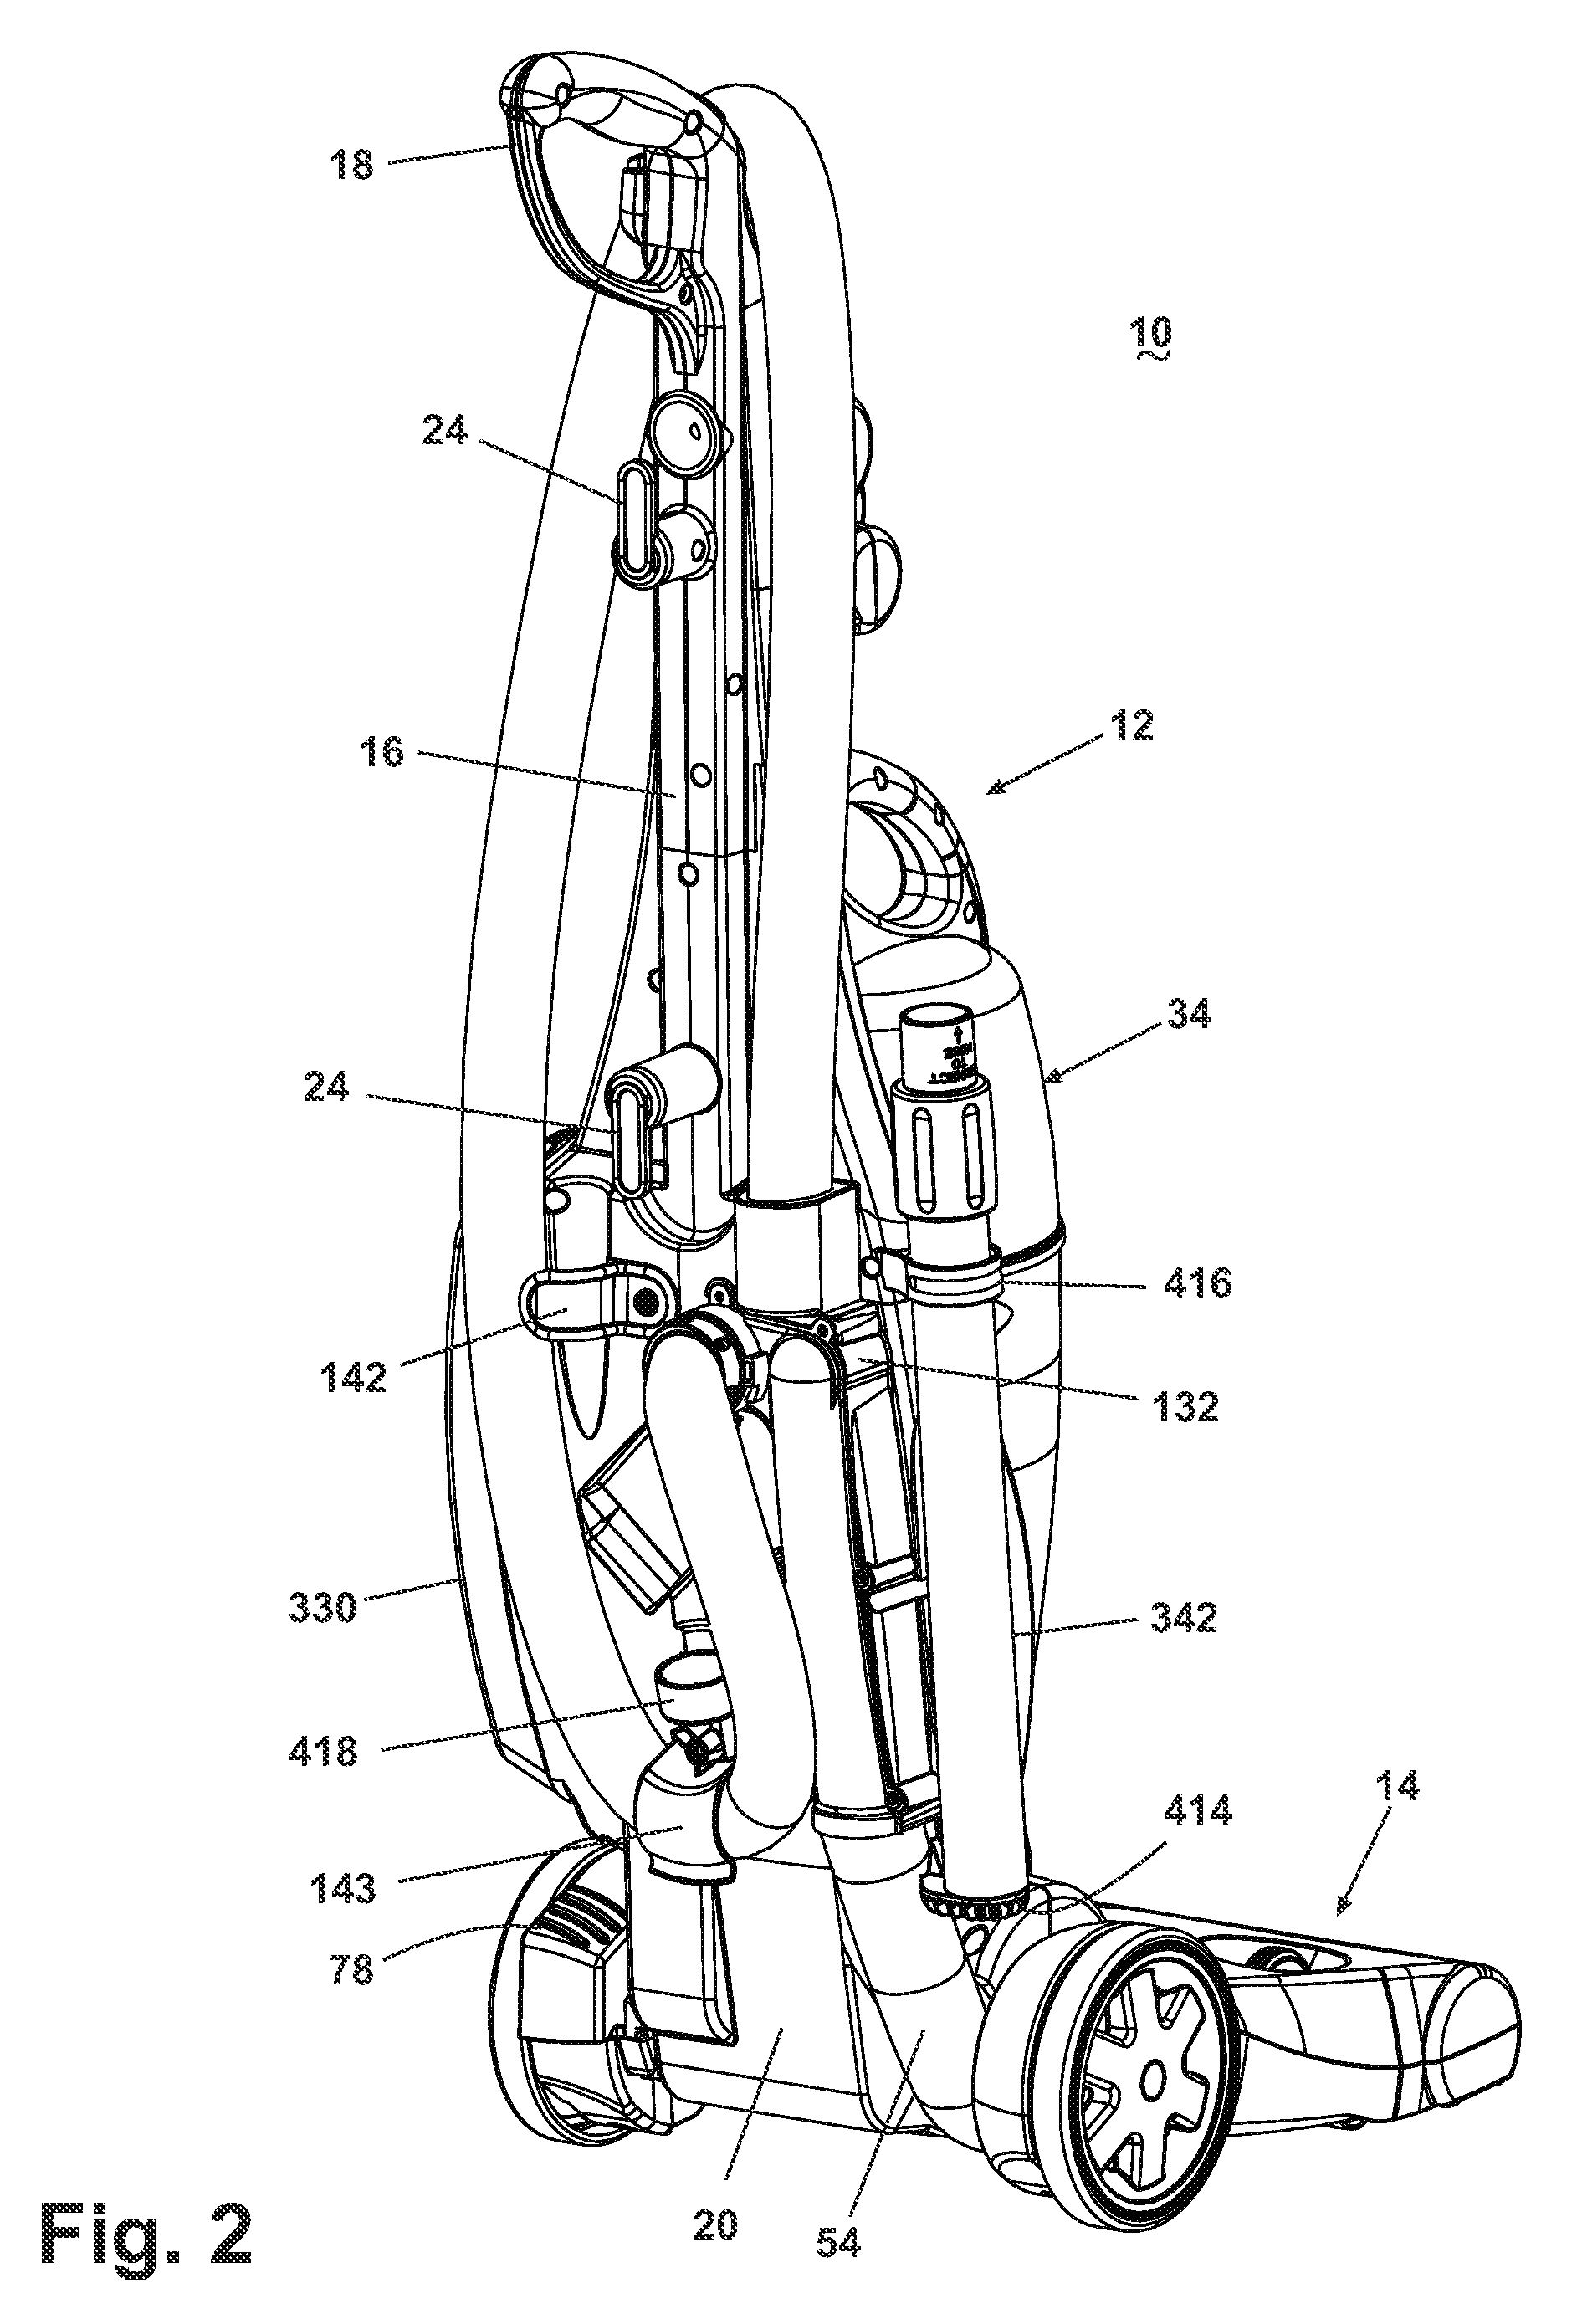 Vacuum cleaner with improved hygenic performance